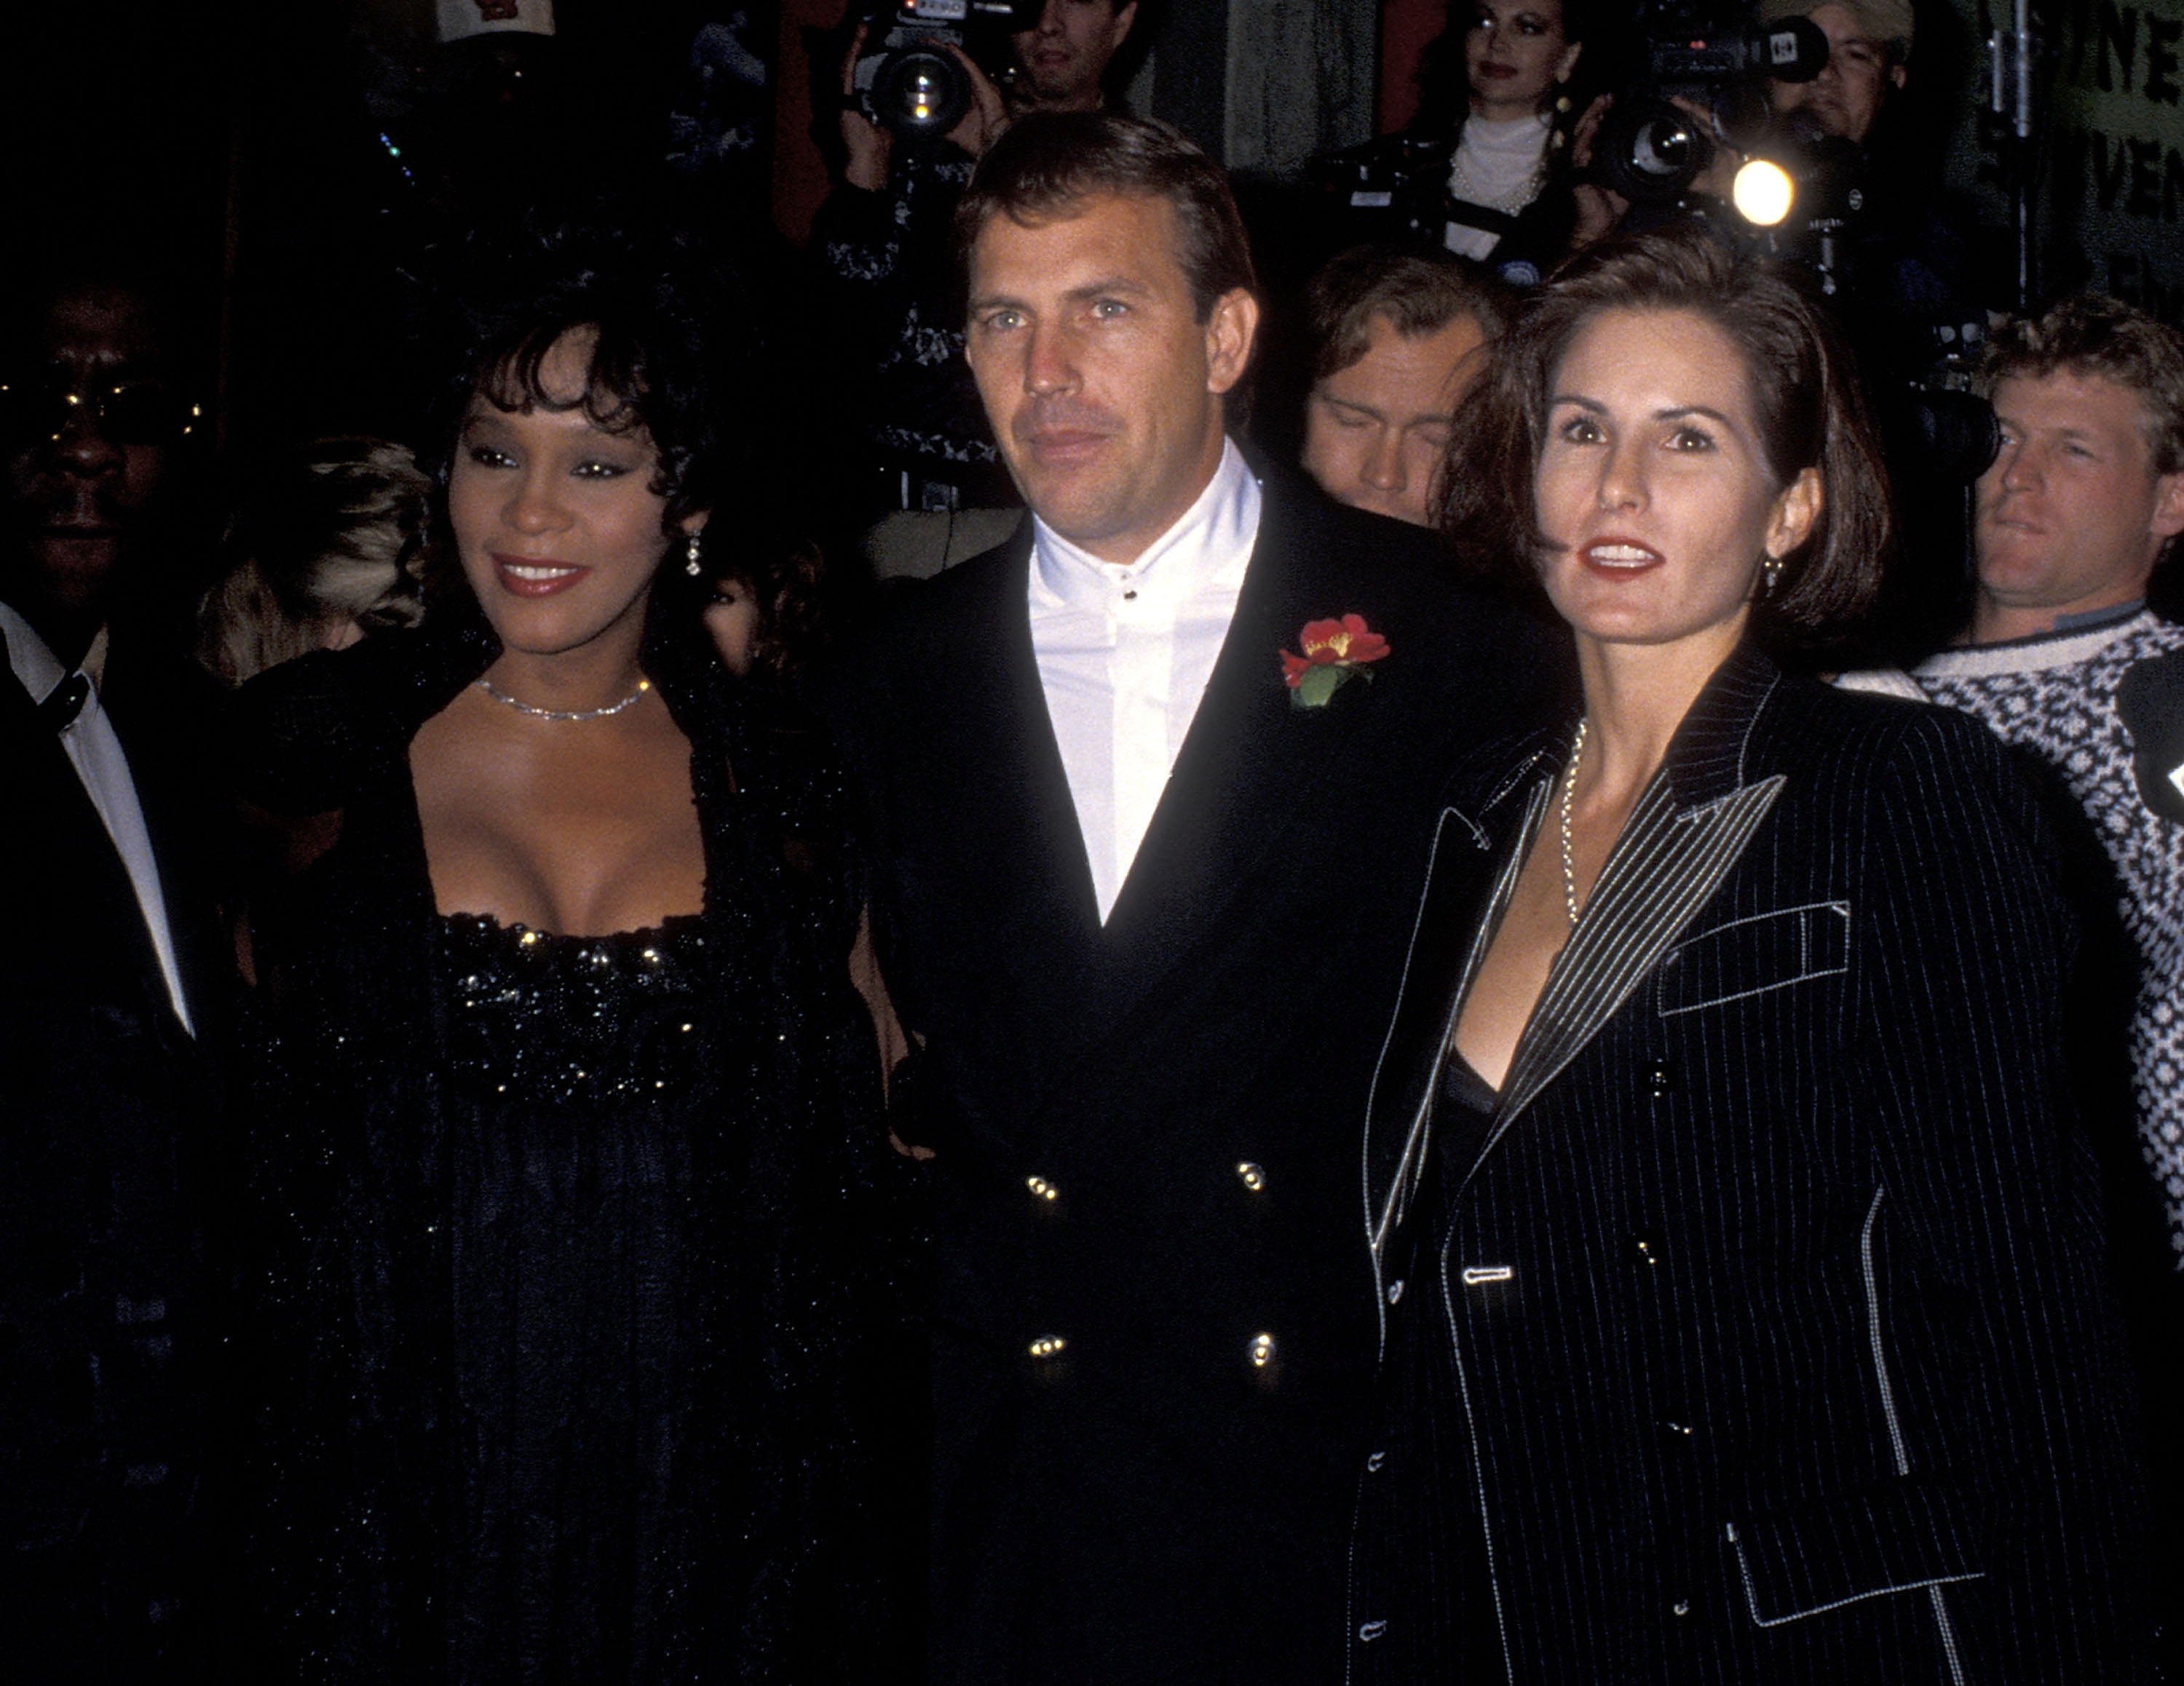 Whitney Houston, Kevin Costner, and Cindy Costner at the Hollywood premiere of "The Bodyguard," 1992 | Source: Getty Images